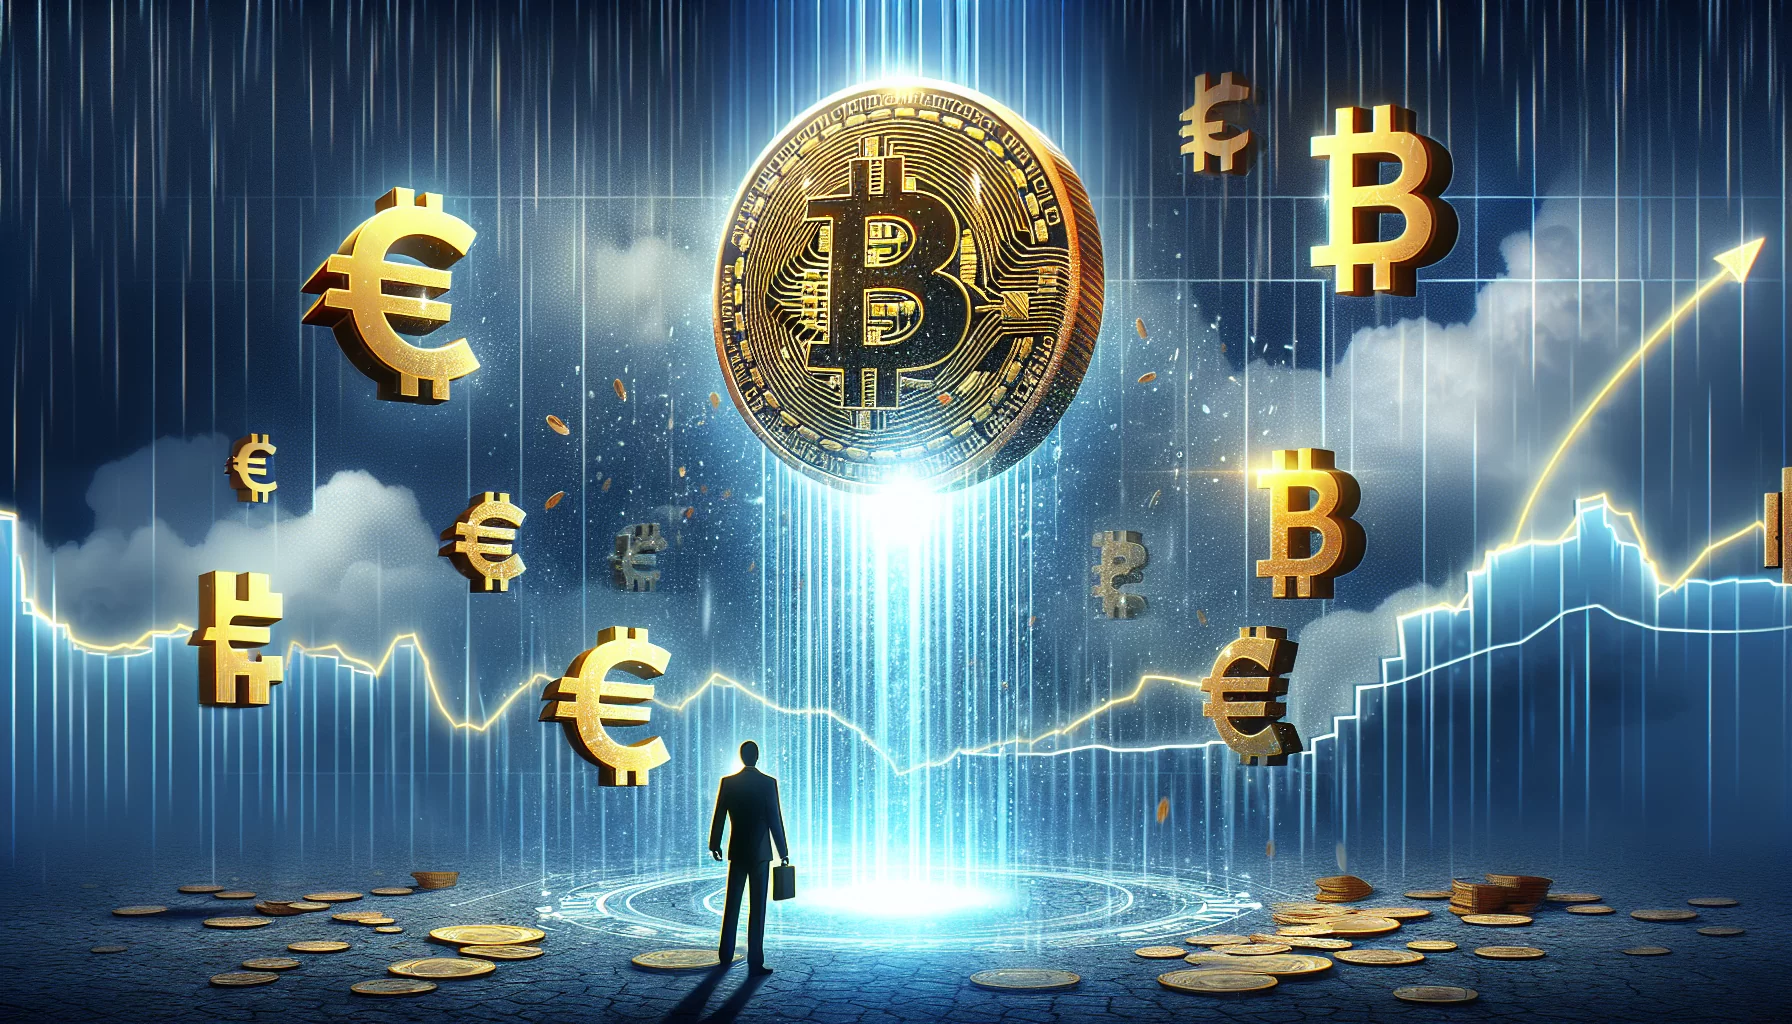 Bitcoin's resilience amidst ECB rate cut: a spotlight on cryptocurrencies' role in future finance